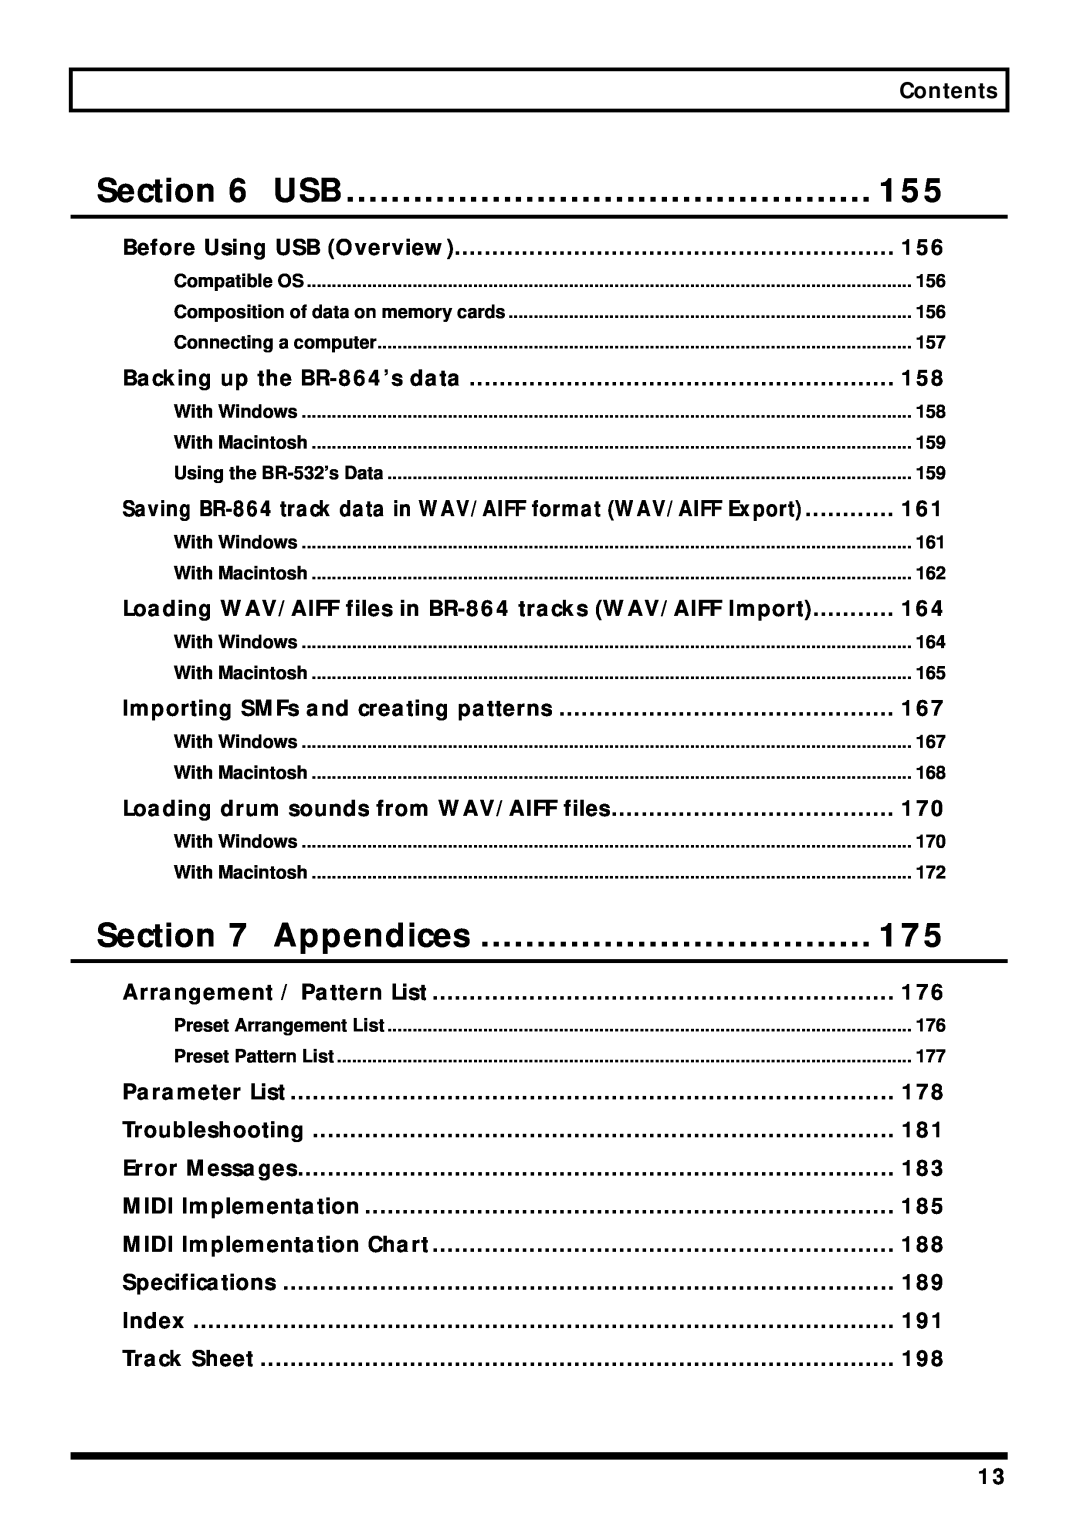 Roland BR-864 owner manual Section, Appendices 